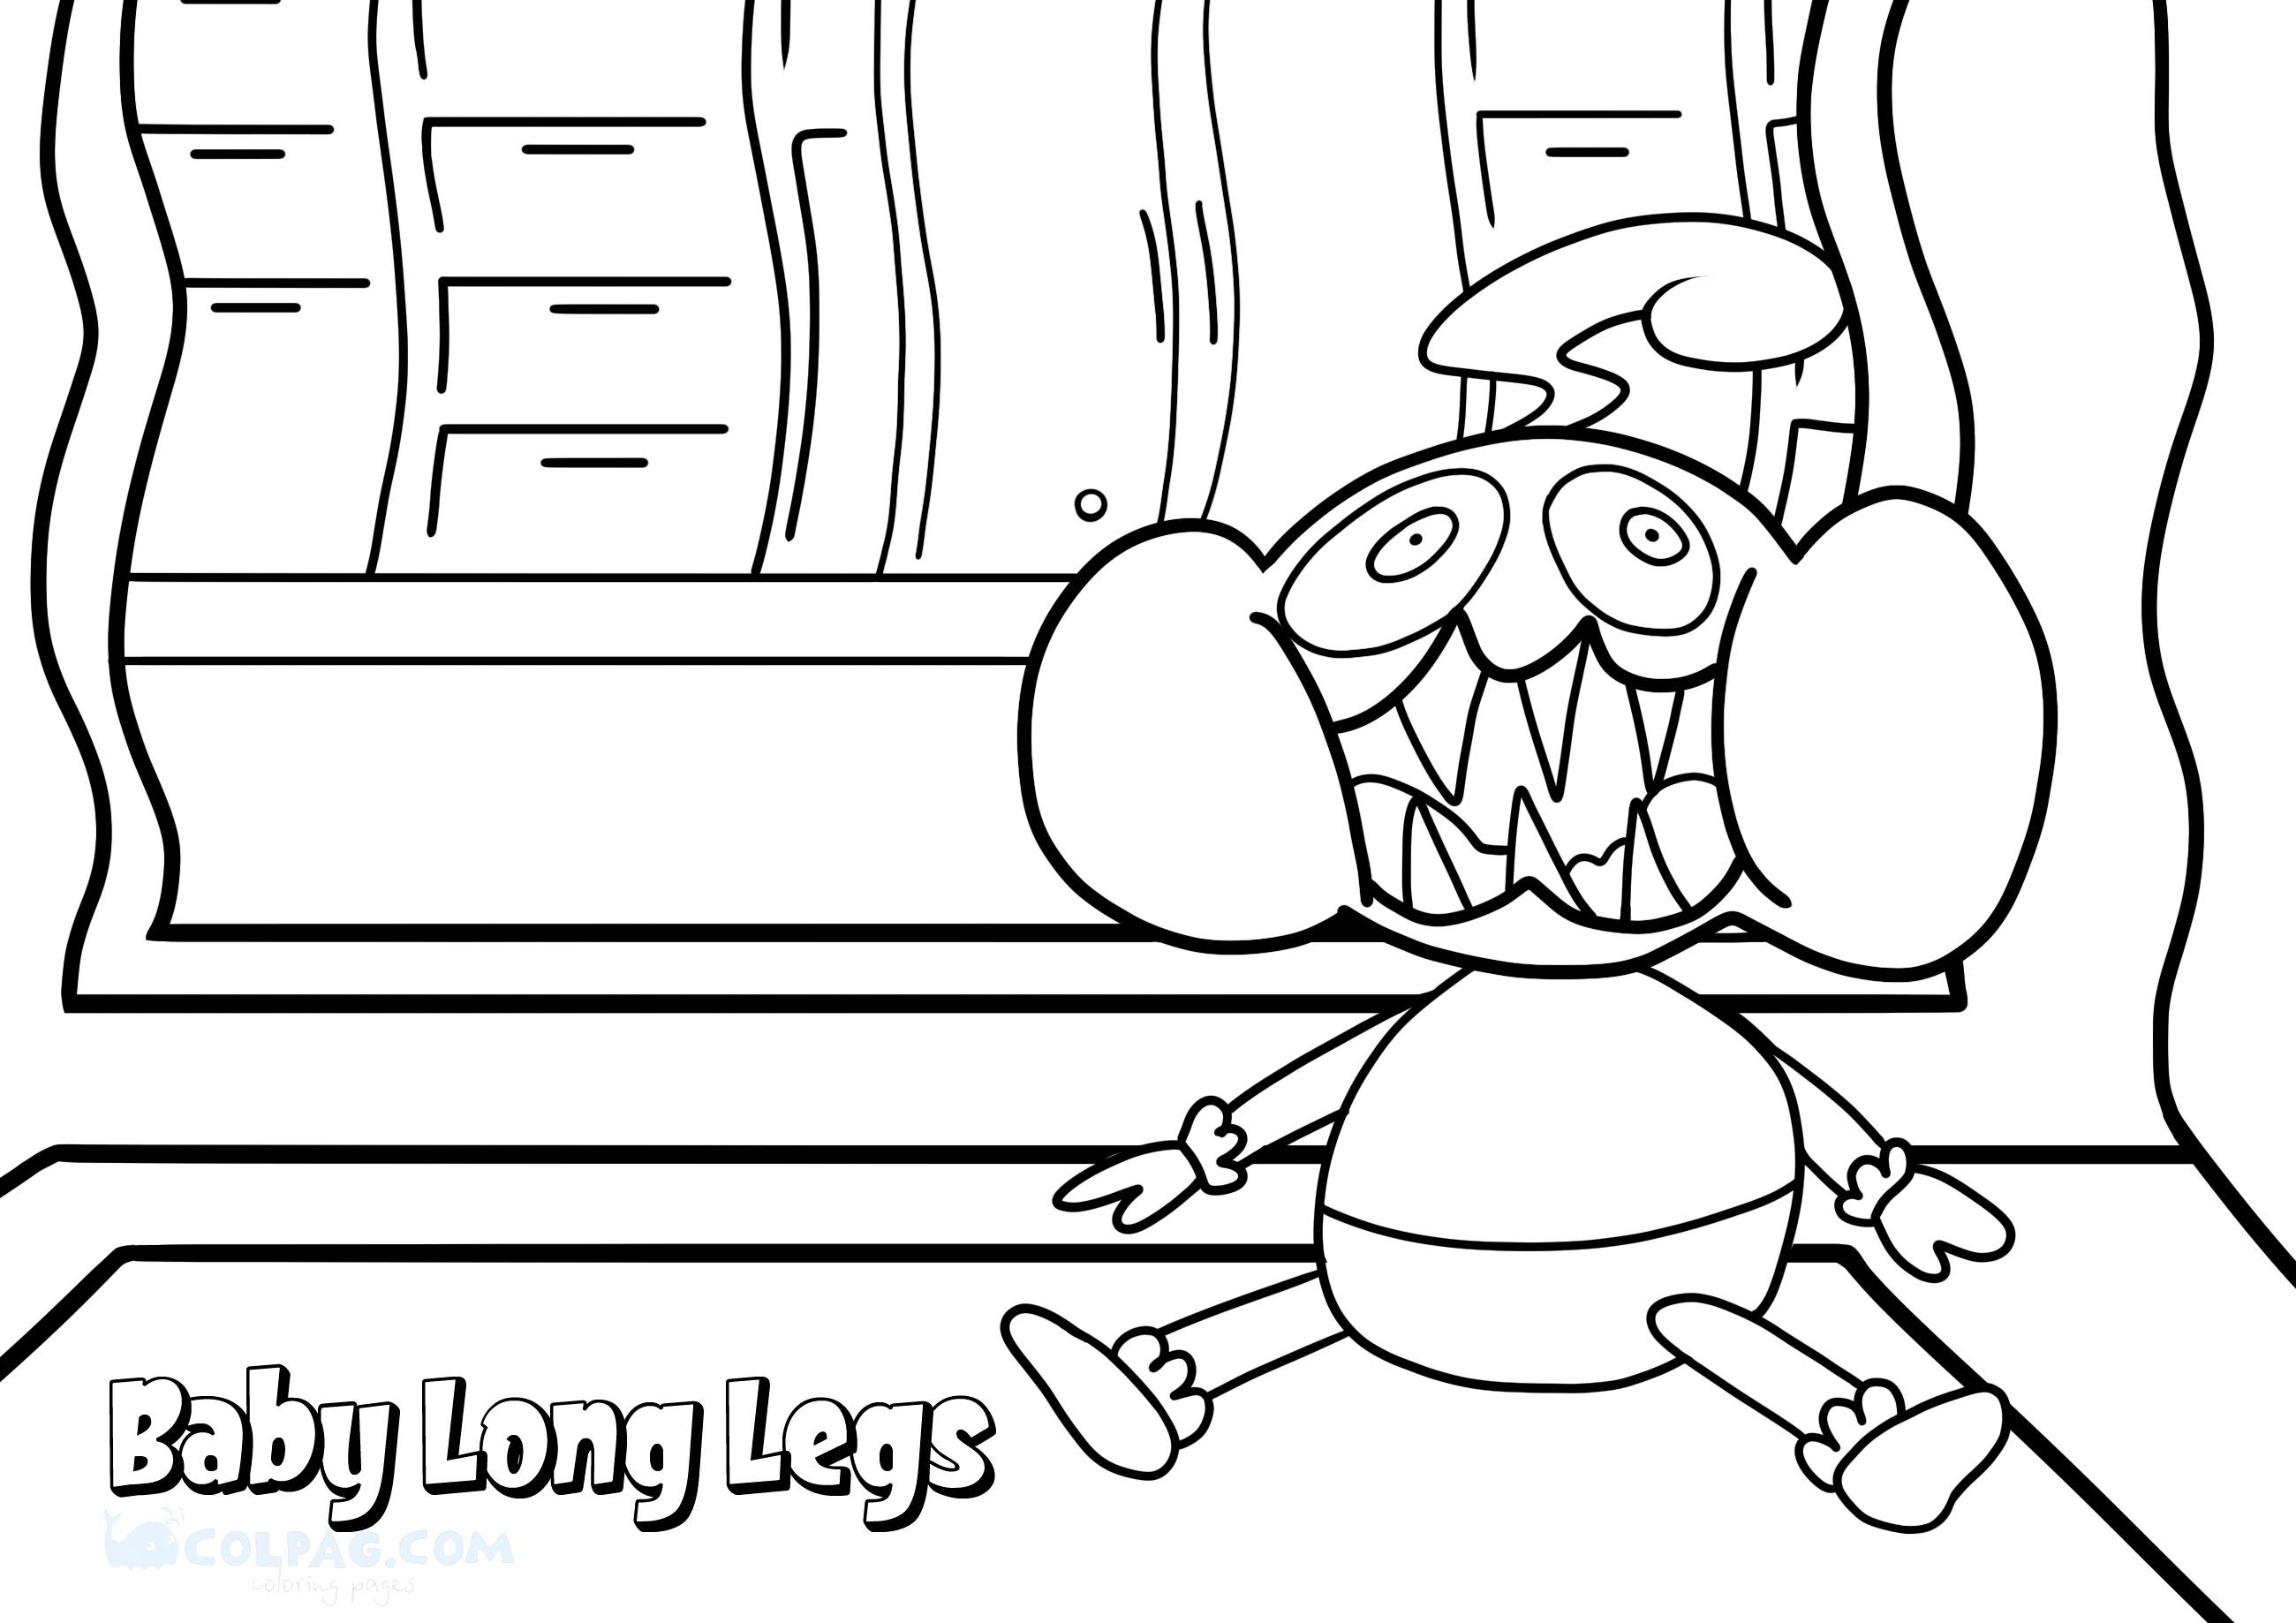 baby-long-legs-coloring-page-colpag-com-3